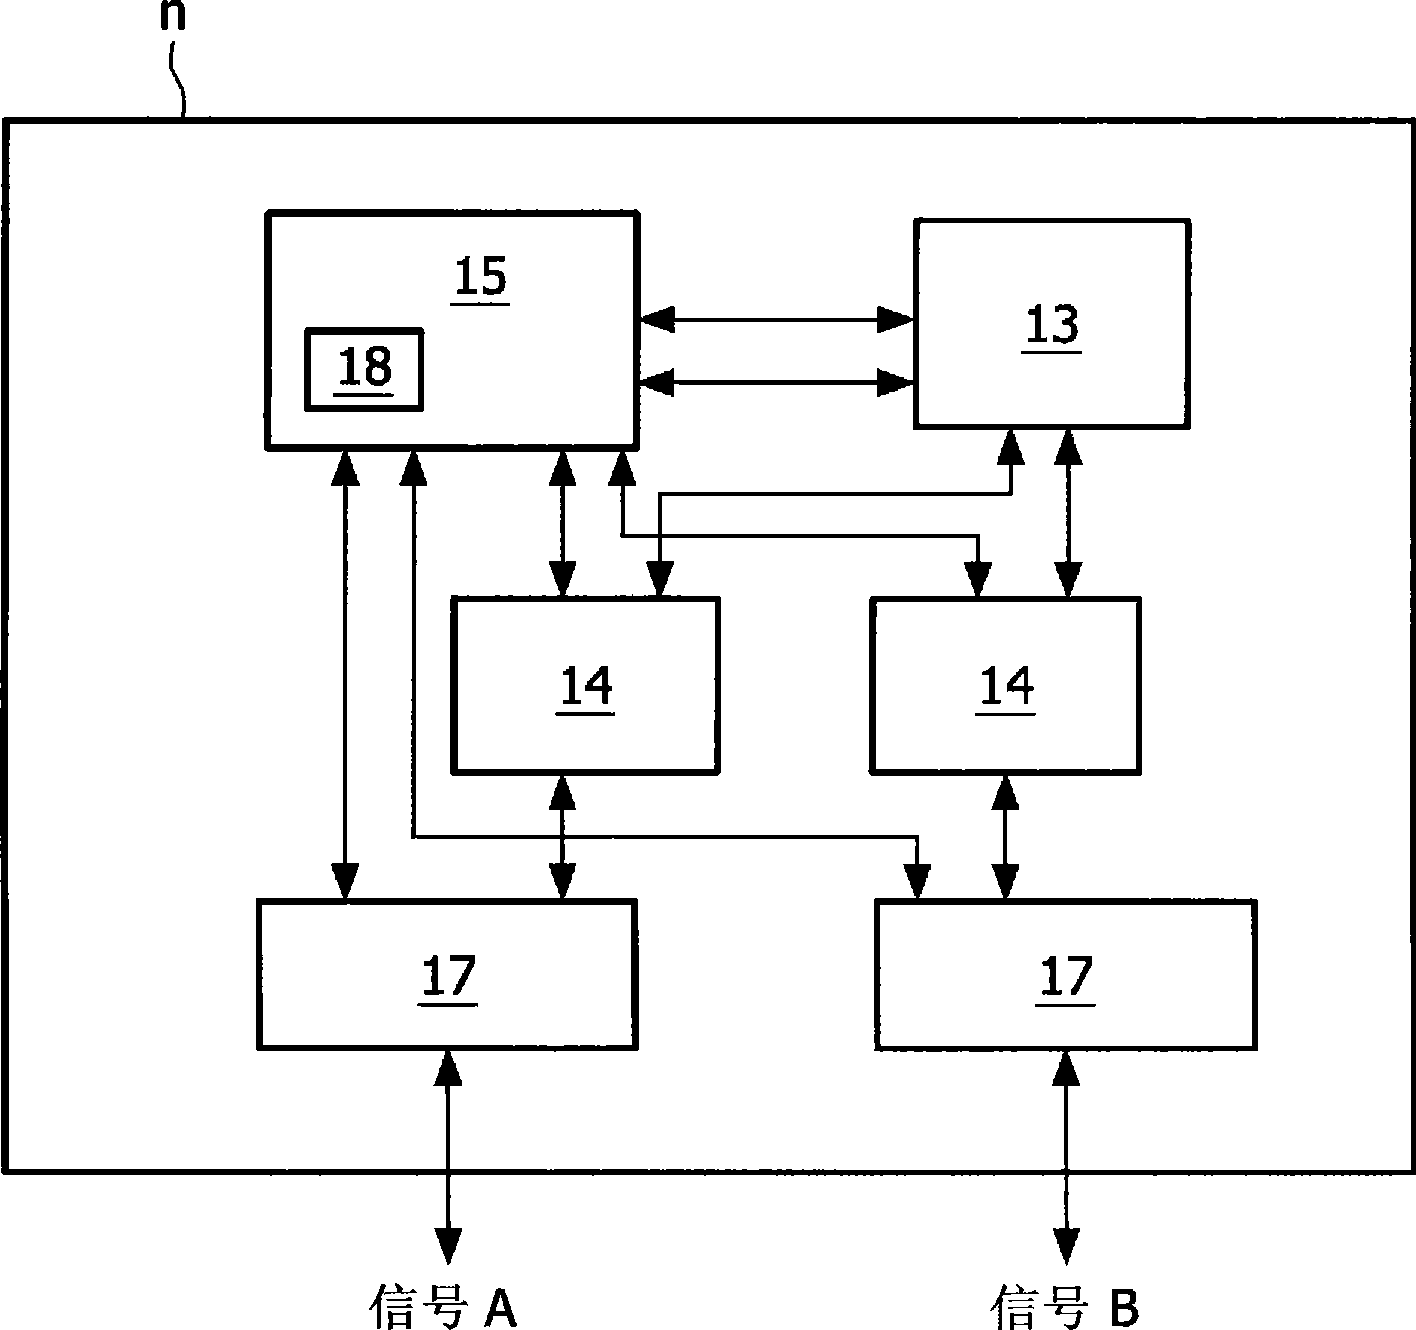 Intelligent star coupler for time triggered communication protocol and method for communicating between nodes within a network using a time trigger protocol